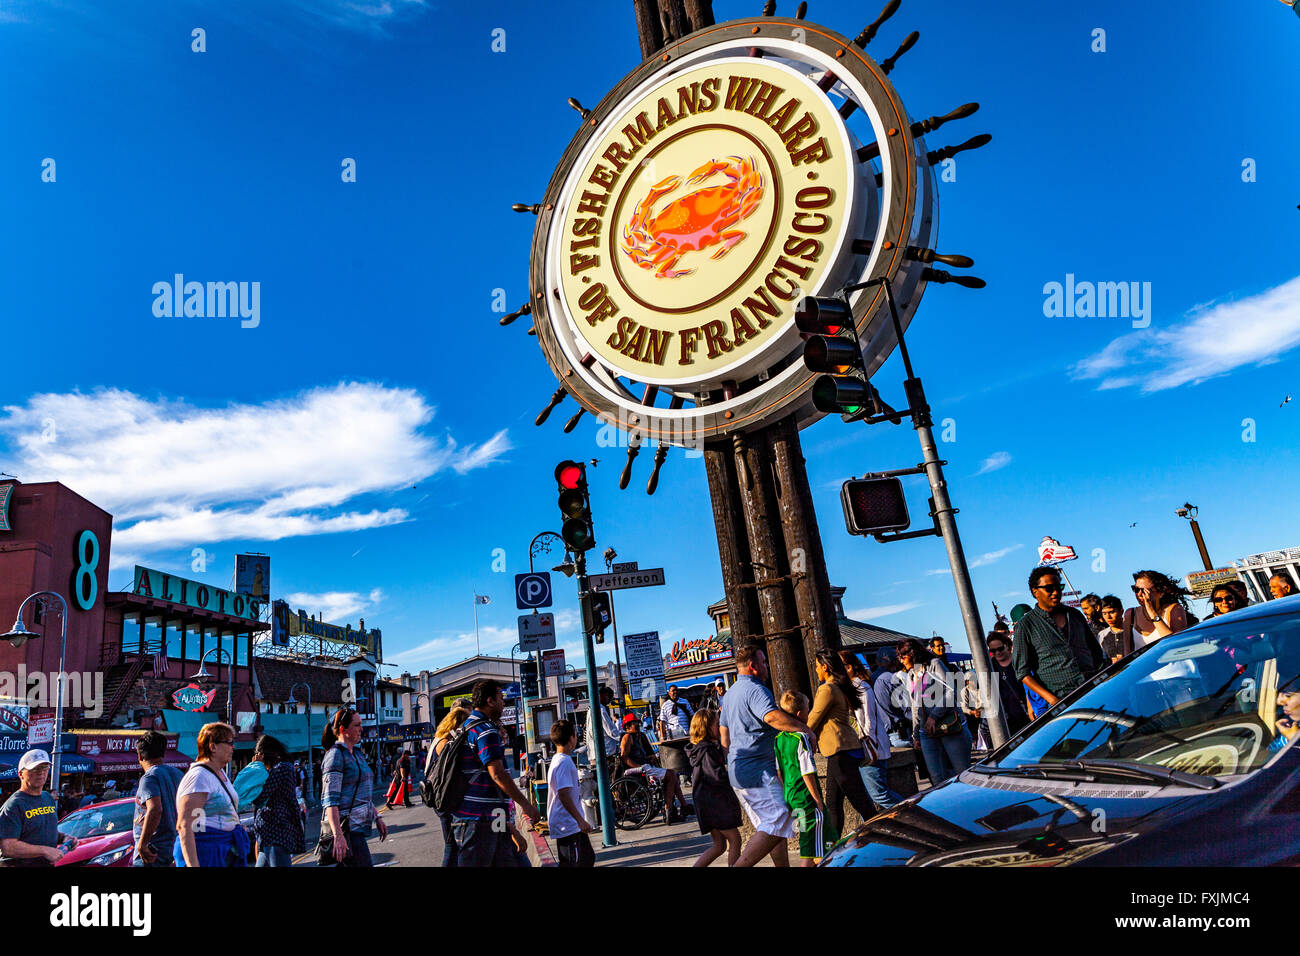 Pier 39, Fisherman's Wharf area of San Francisco with many tourists on a warm sunny Saturday afternoon in April 2016 Stock Photo